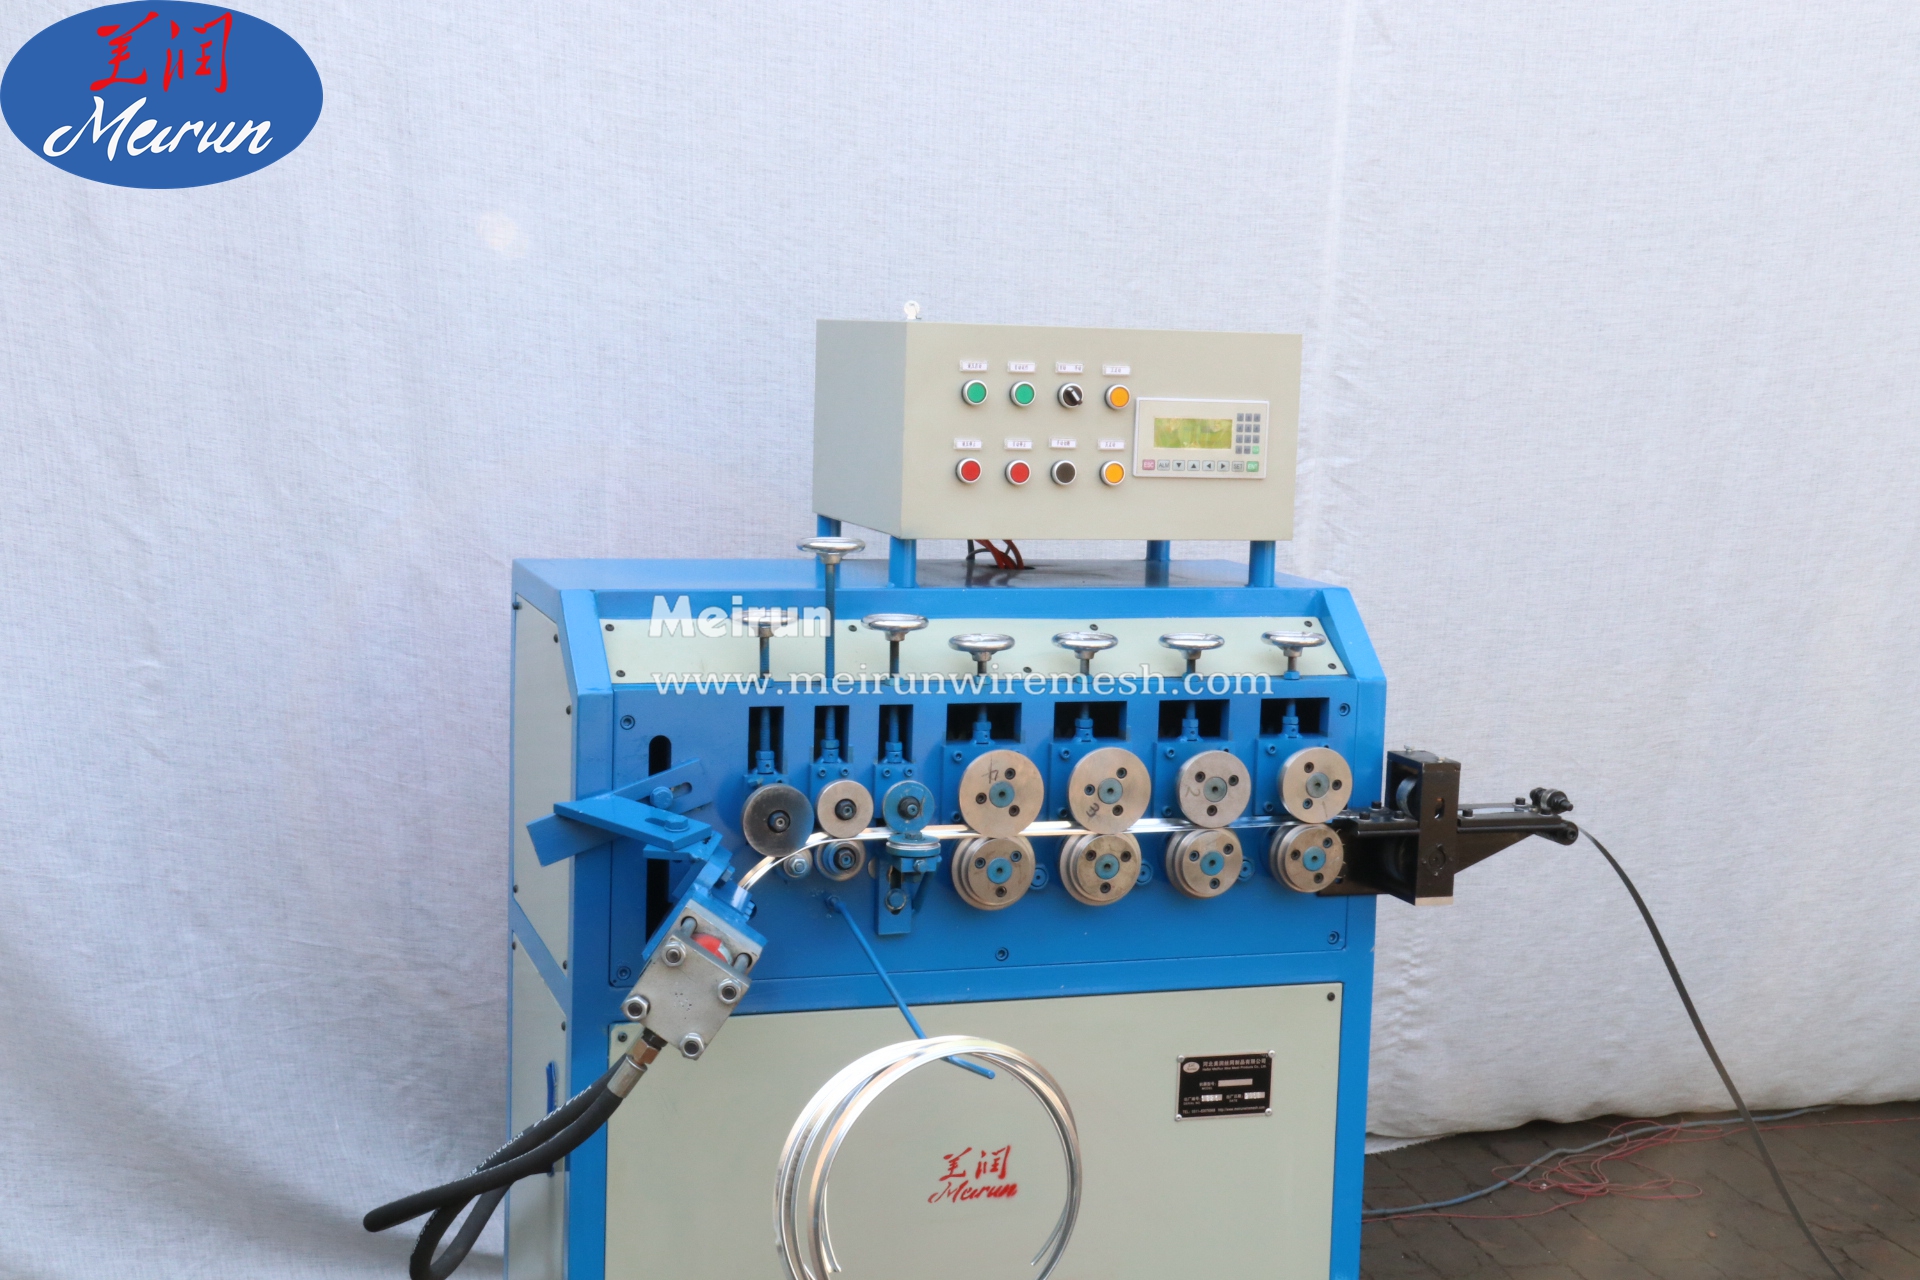 Made in China Wire Rolling Coiler Making Machine